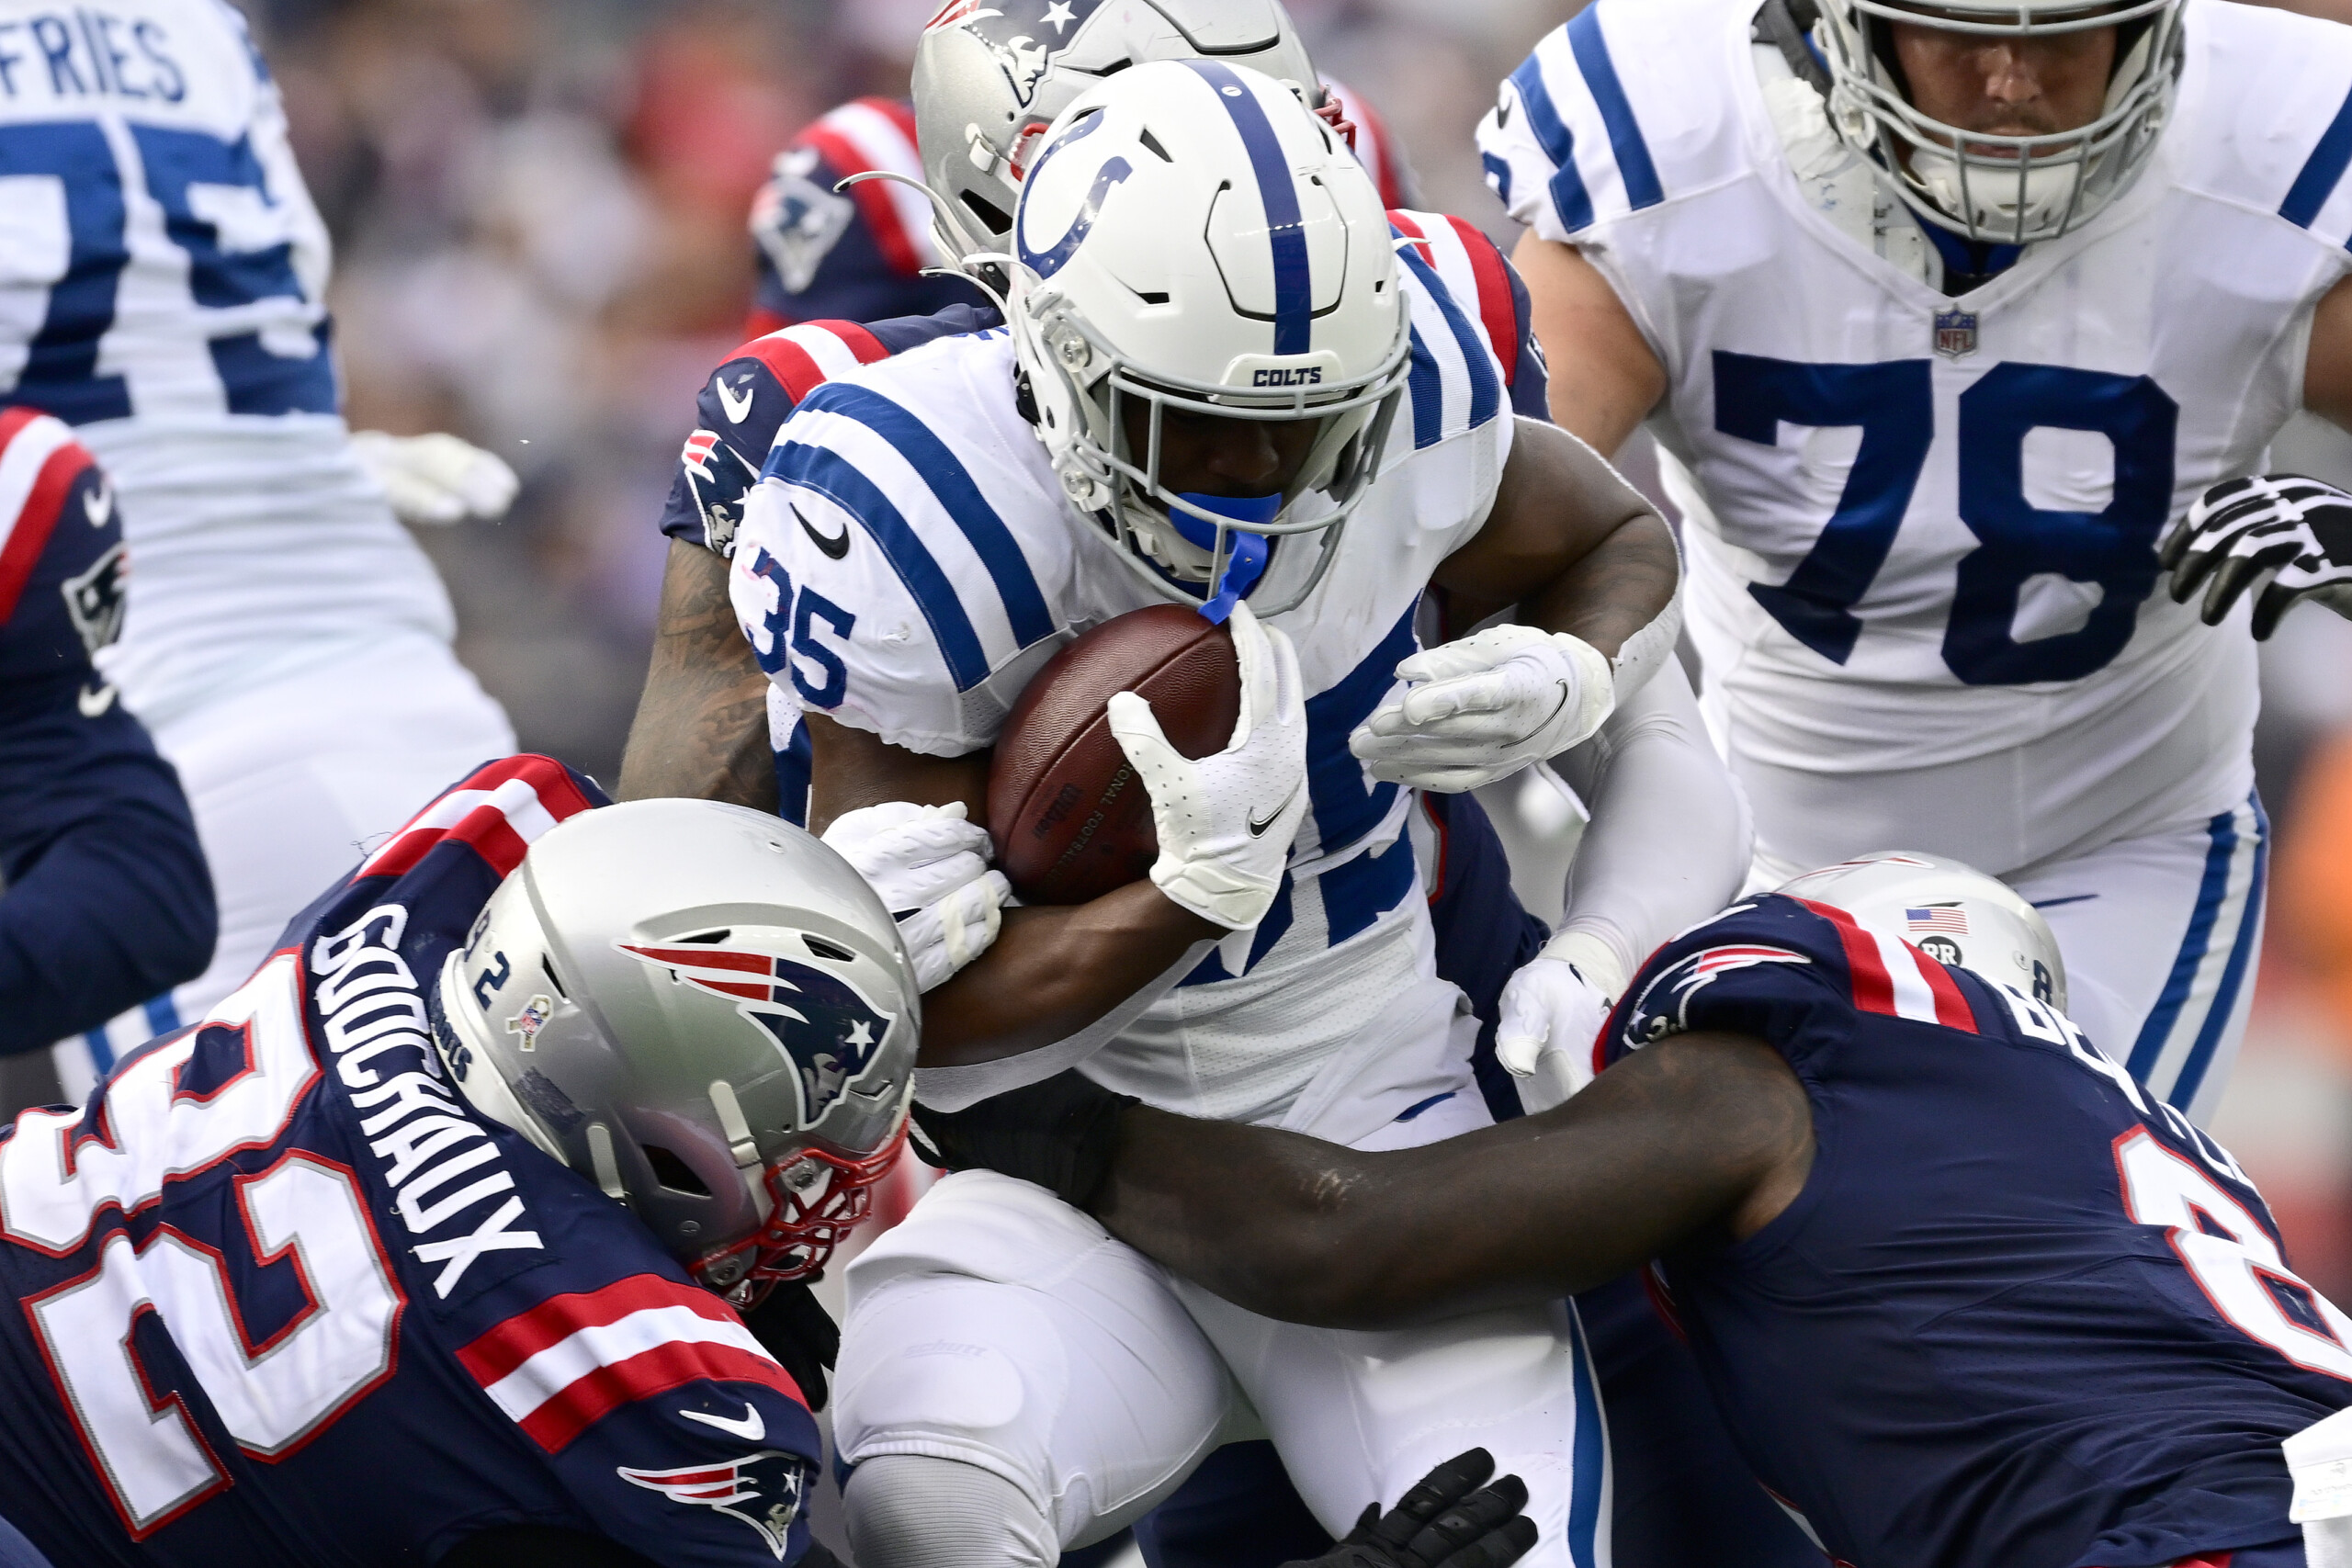 Pats get 9 sacks in dominant 26-3 victory over Colts - WISH-TV, Indianapolis News, Indiana Weather